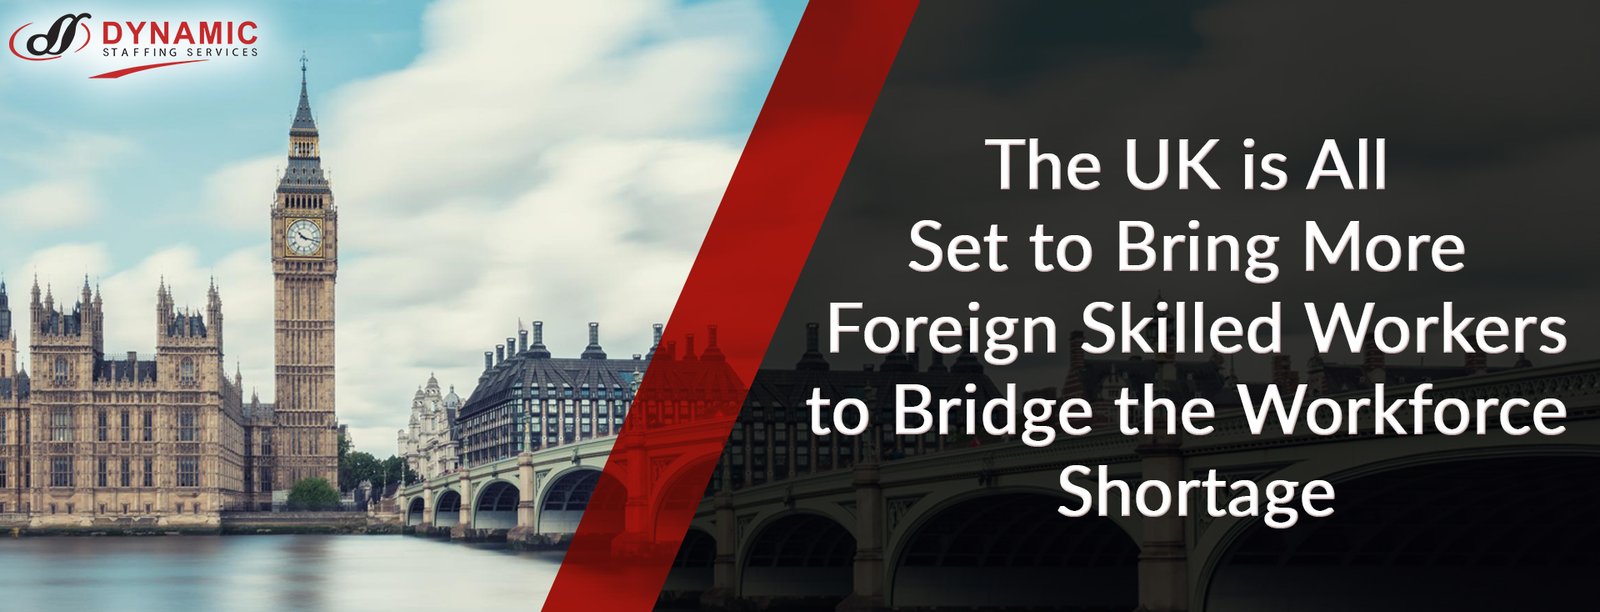 The UK is All Set to Bring More Foreign Skilled Workers to Bridge the Workforce Shortage